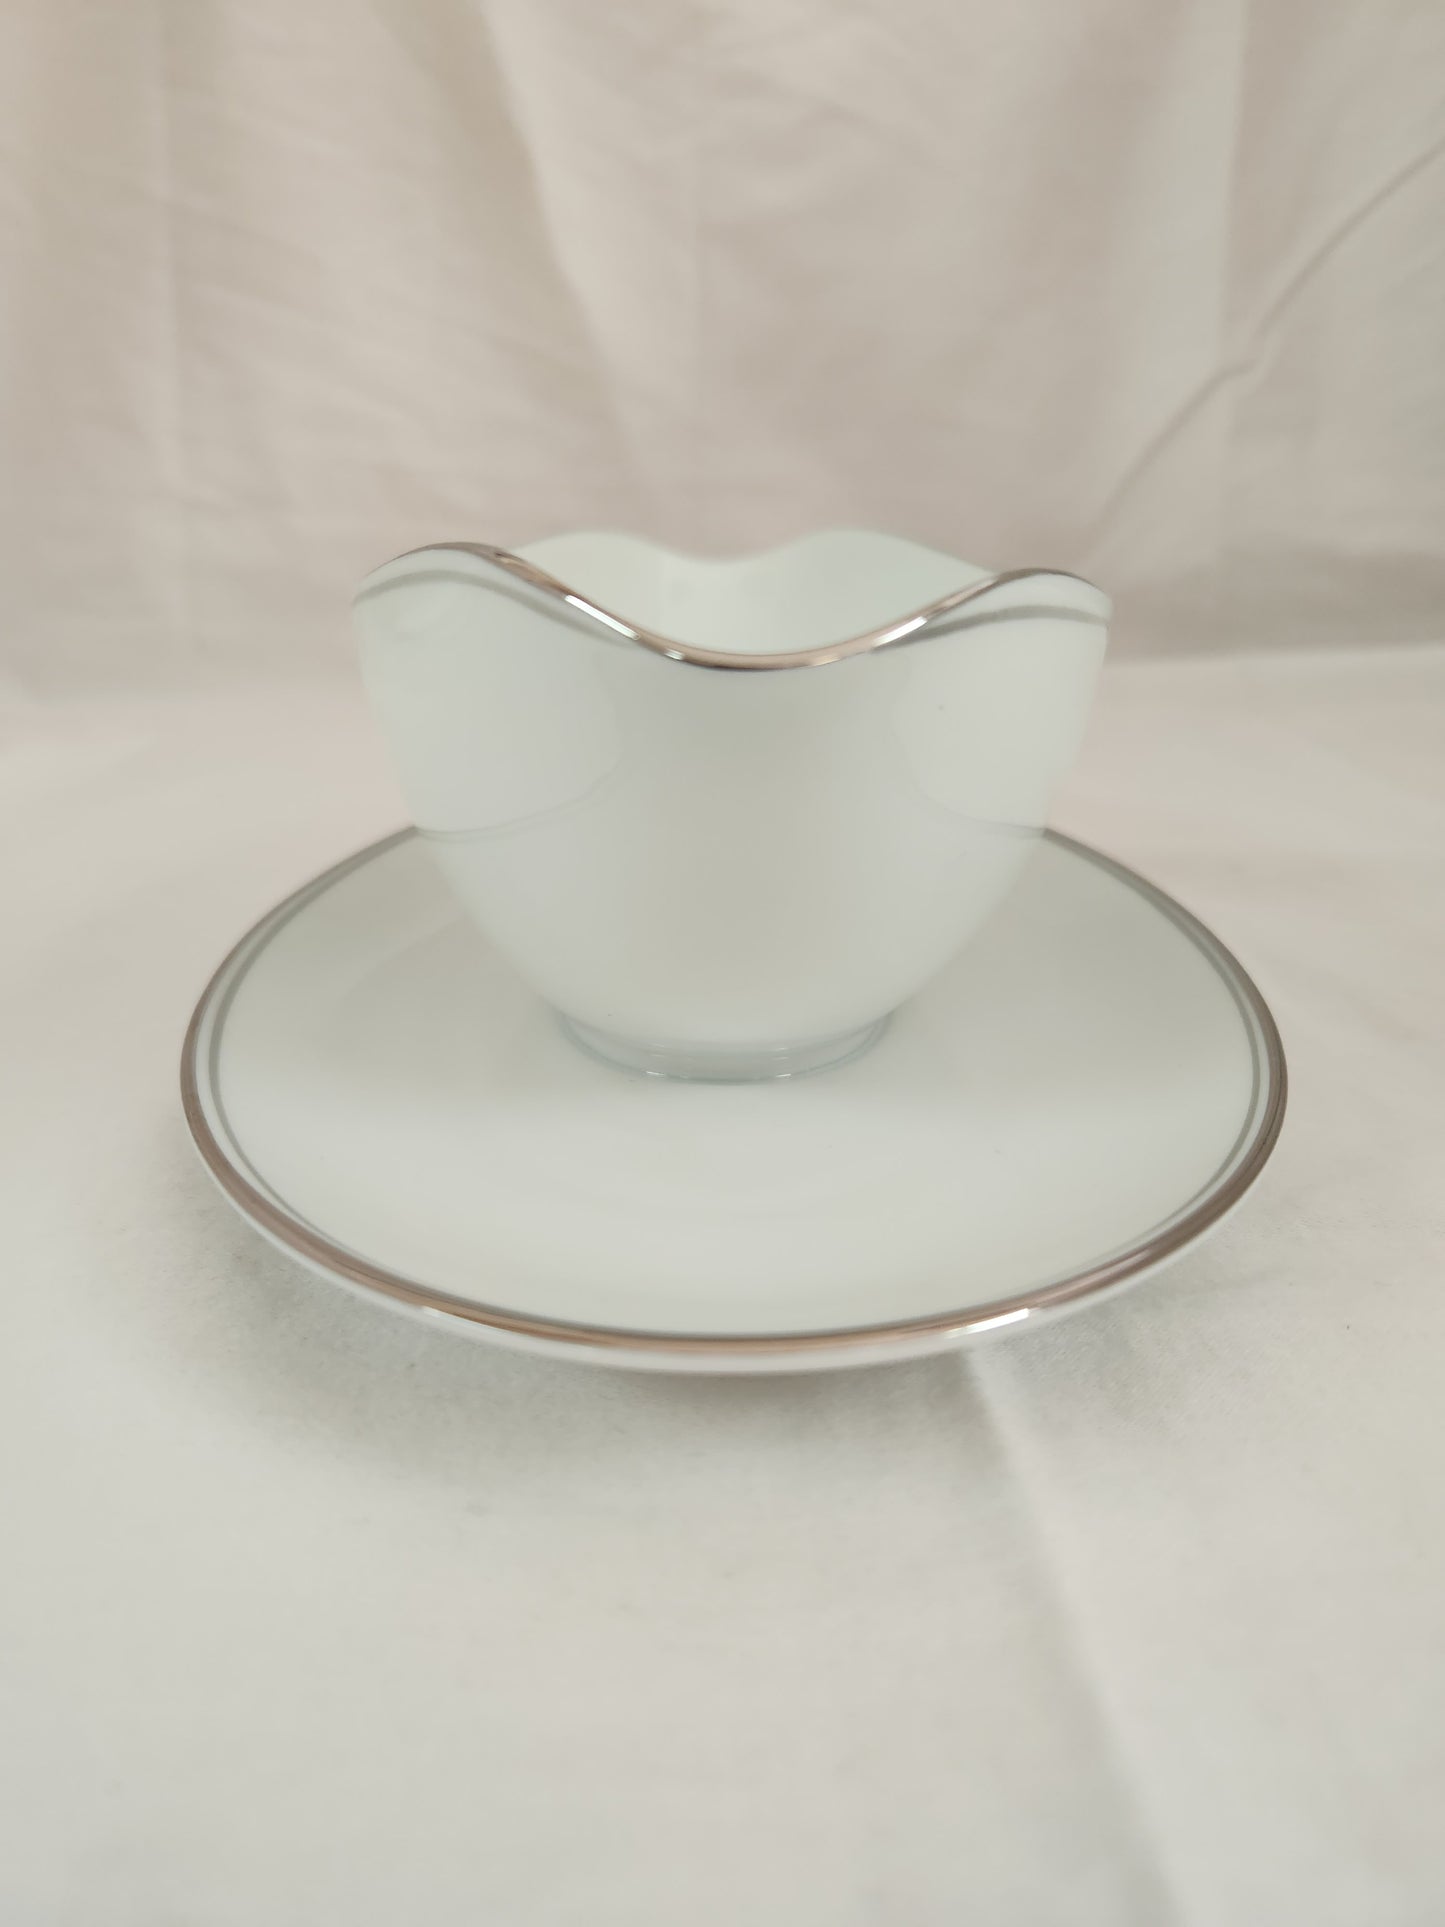 Noritake Graycliff Gravy Boat with Attached Underplate #5861